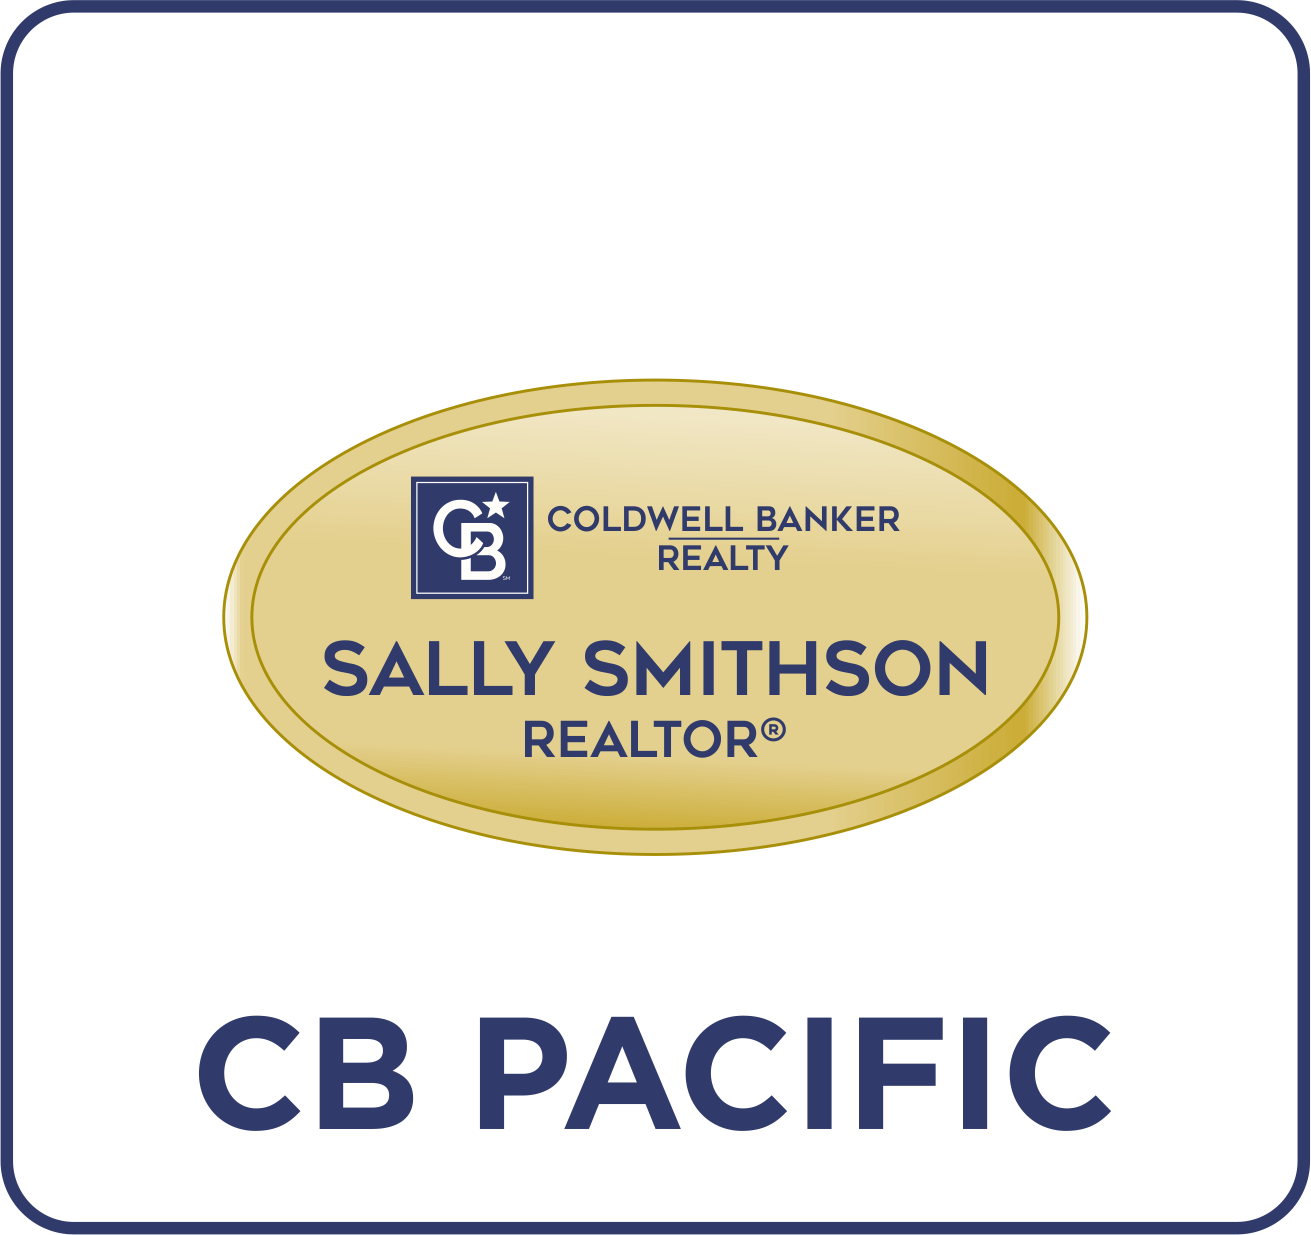 Coldwell Banker Pacific Badges